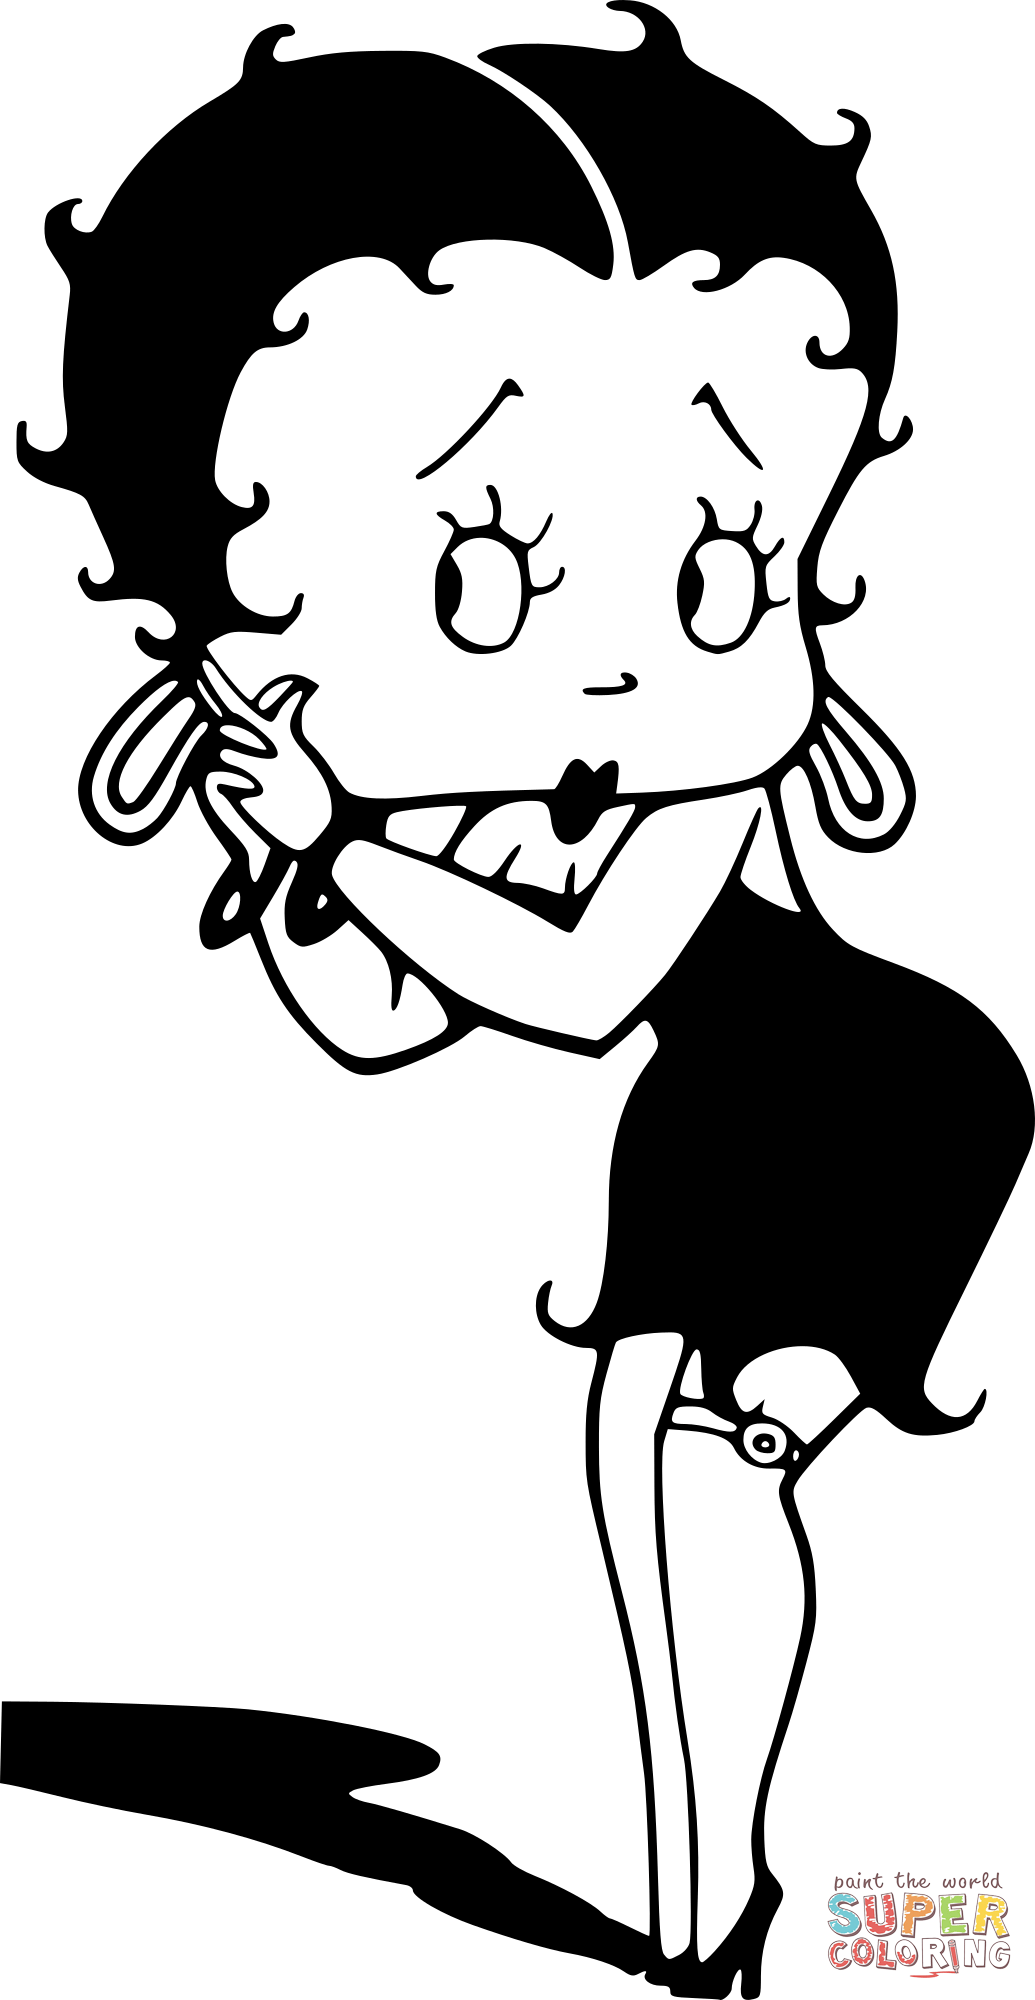 Vintage betty boop april coloring page free printable coloring pages